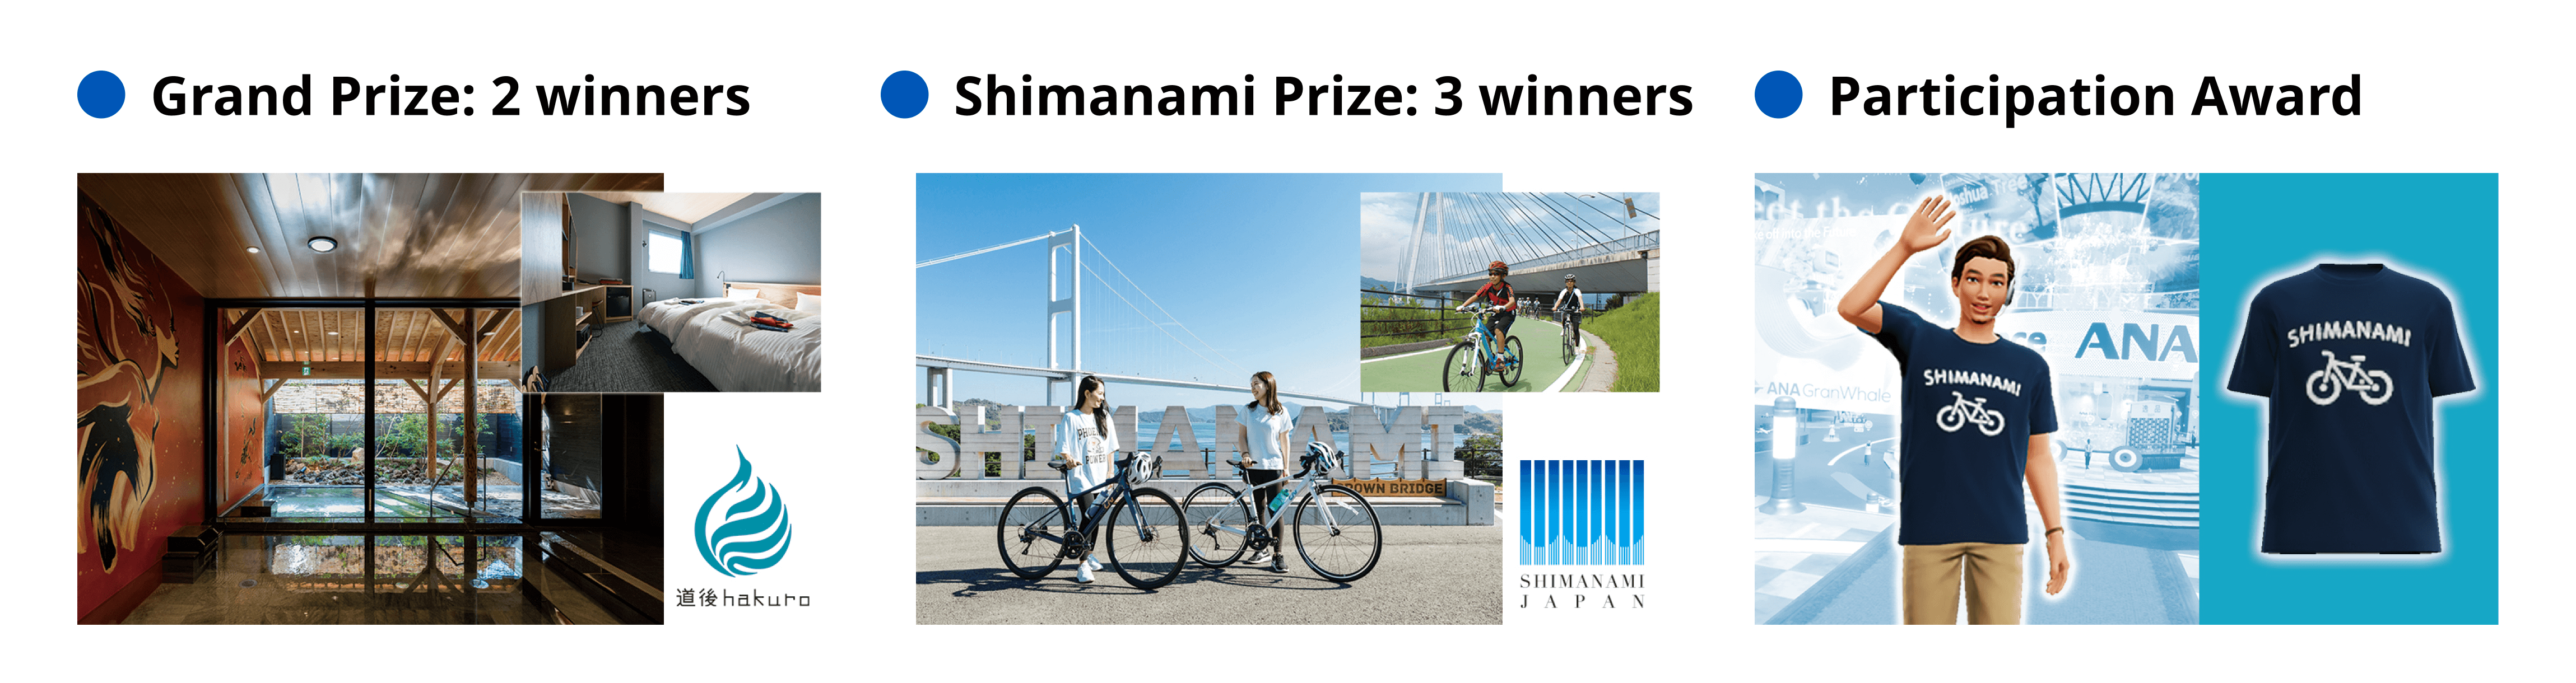 Join the X Posting Campaign in ANA GranWhale, to win Luxurious Prizes by Embarking on the Virtual Trip to Ehime Prefecture’s Shimanami Kaido (Sea Route)!